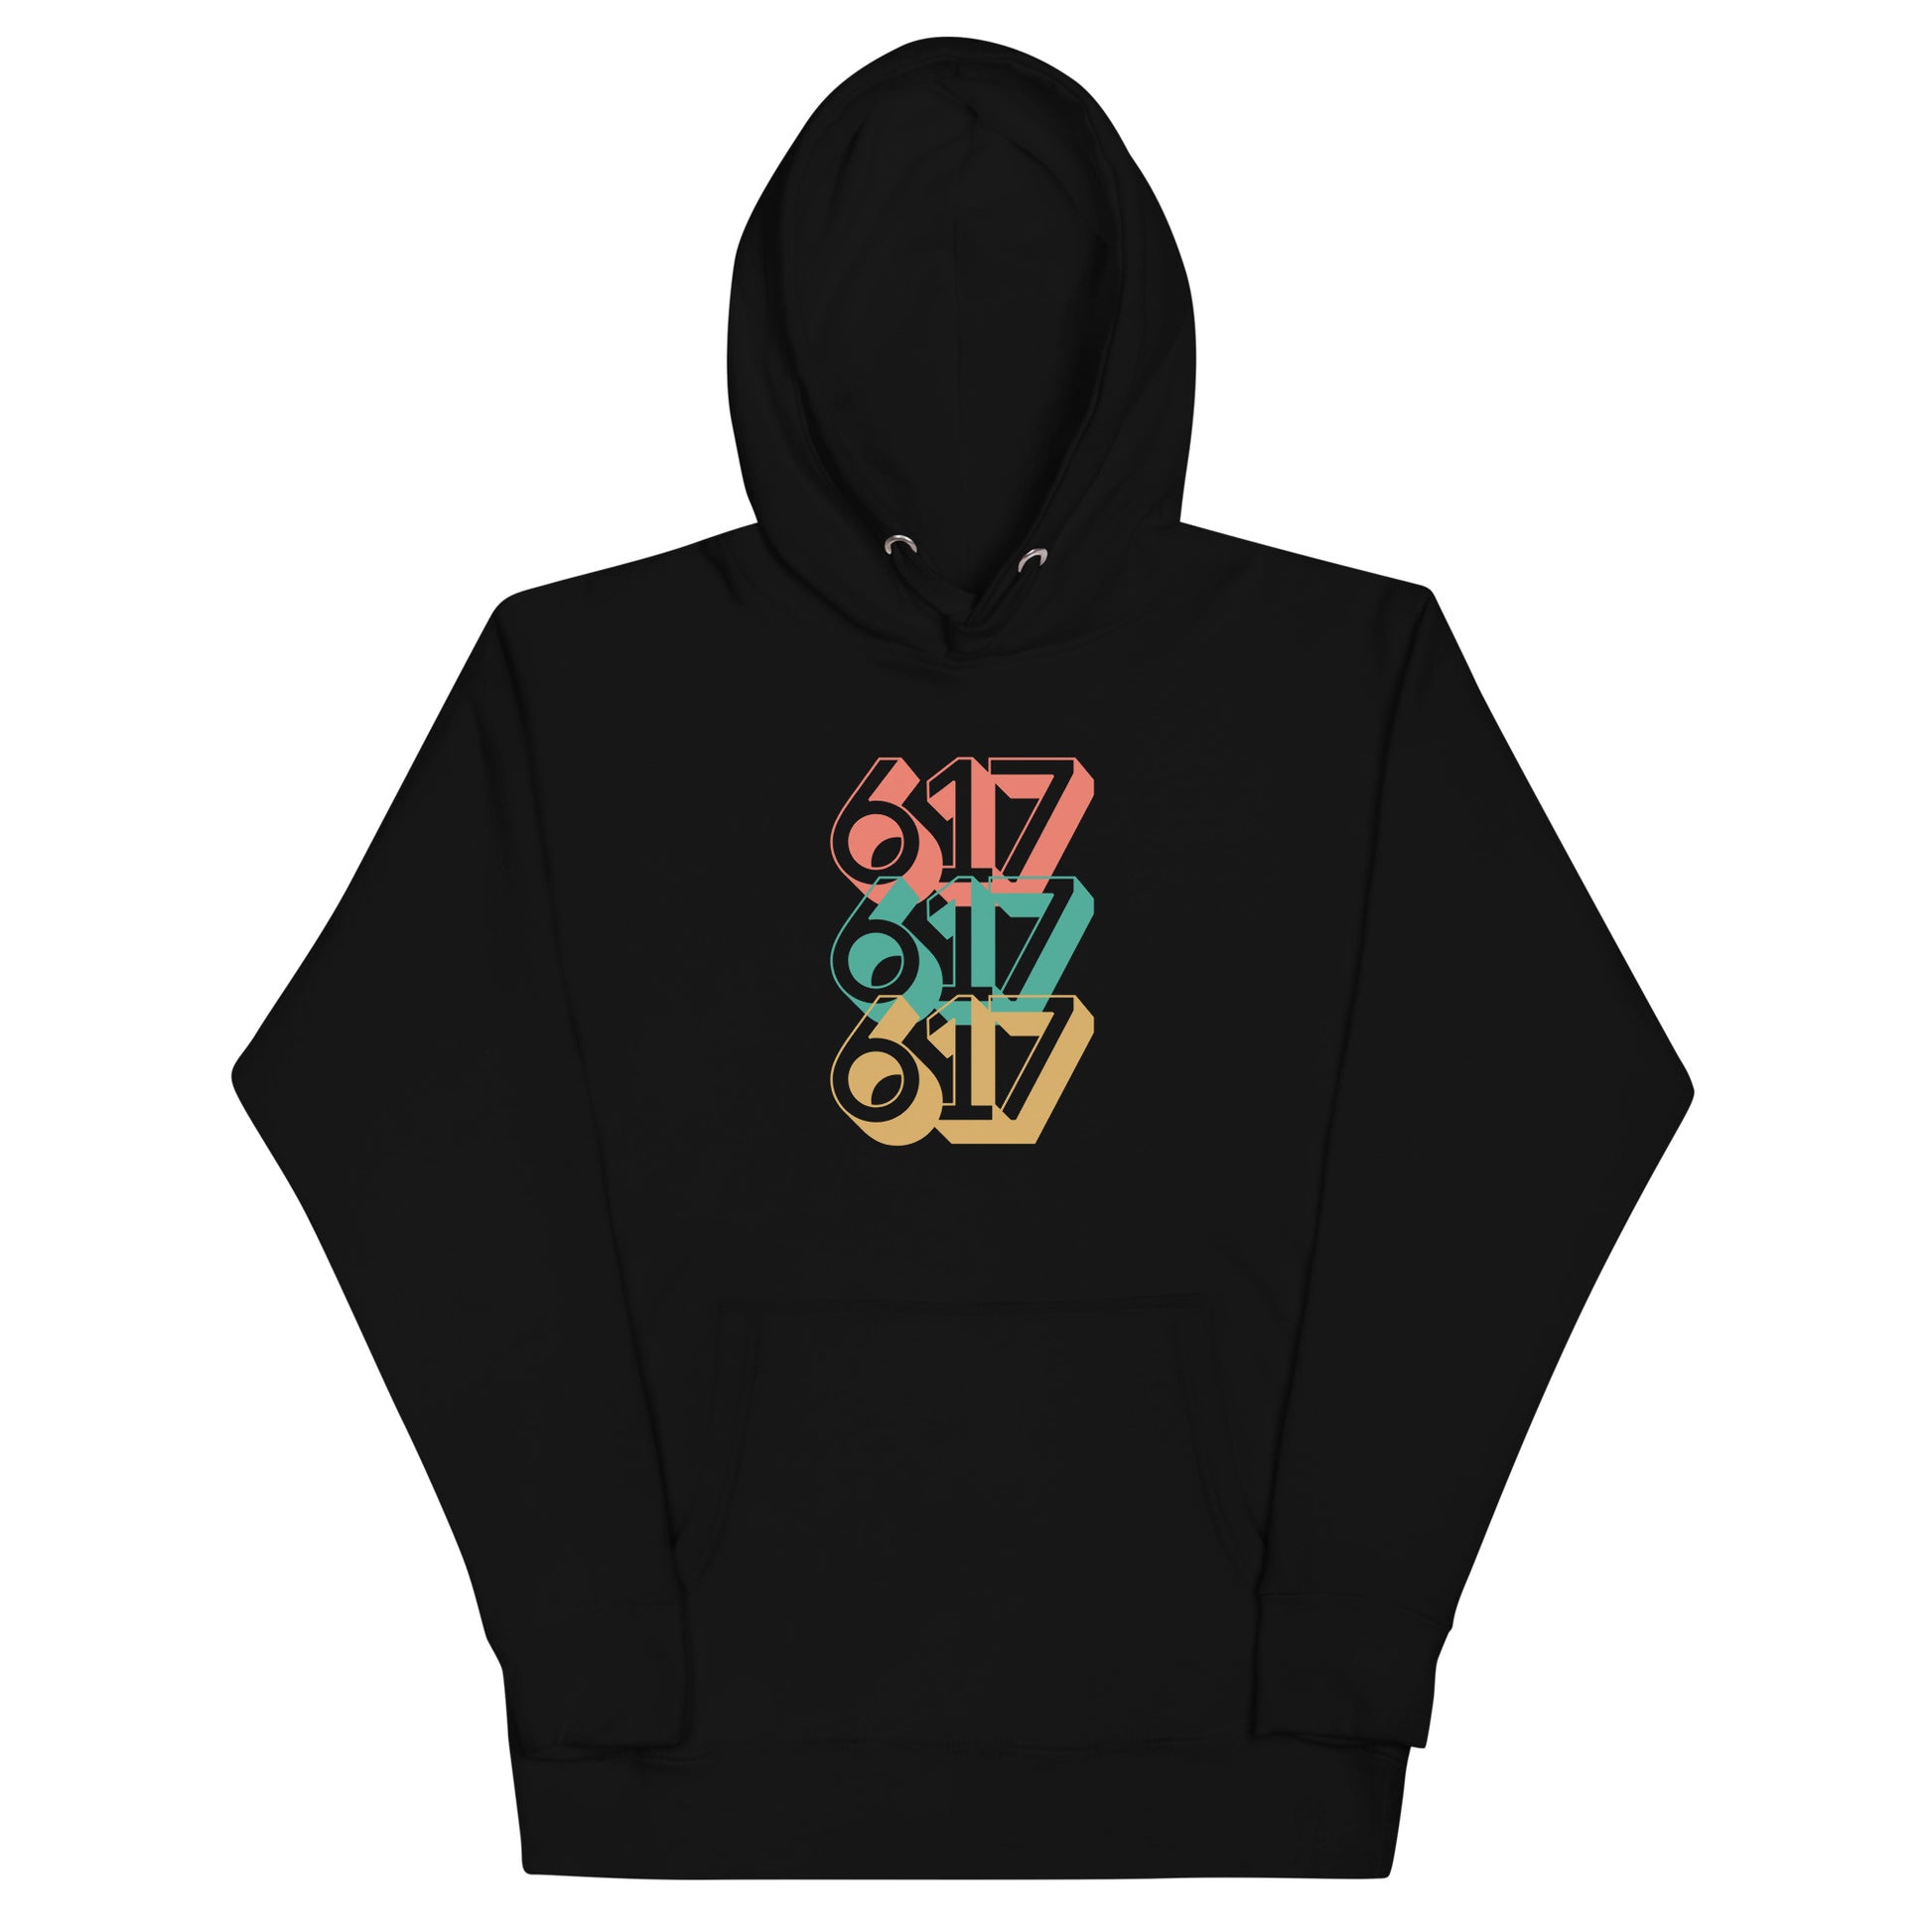 black hoodie with three 617s in red green and yellow